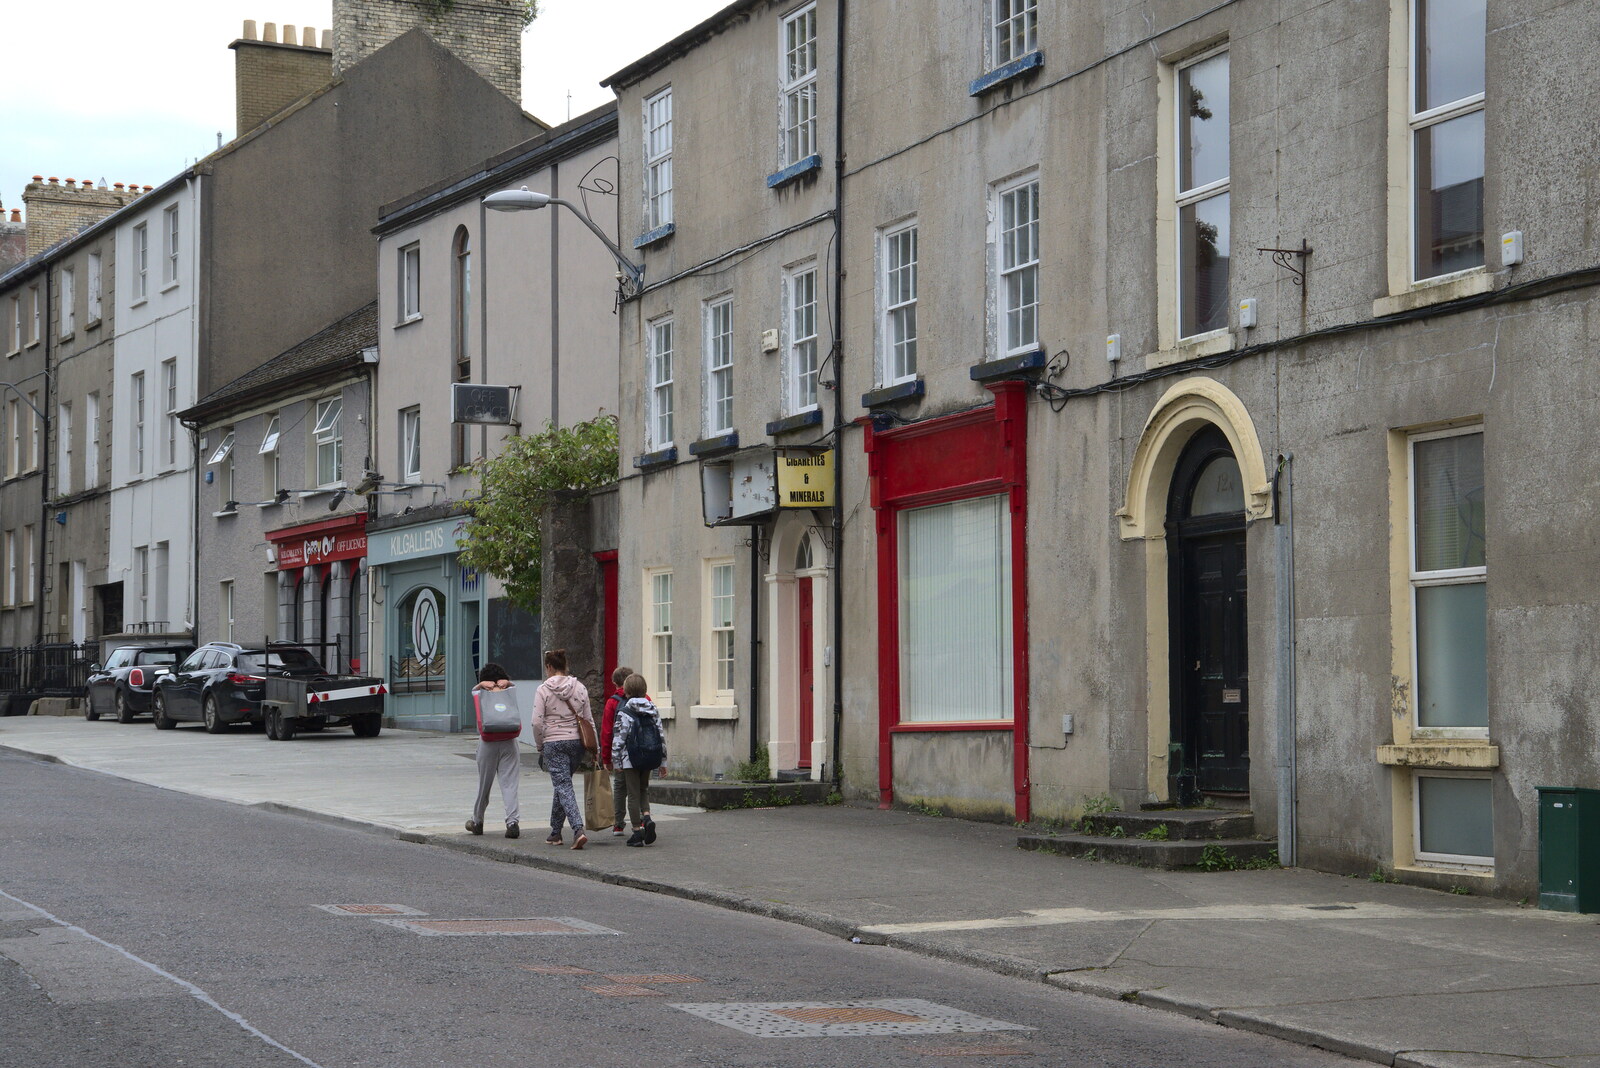 A Trip to Manorhamilton, County Leitrim, Ireland - 11th August 2021: On The Mall